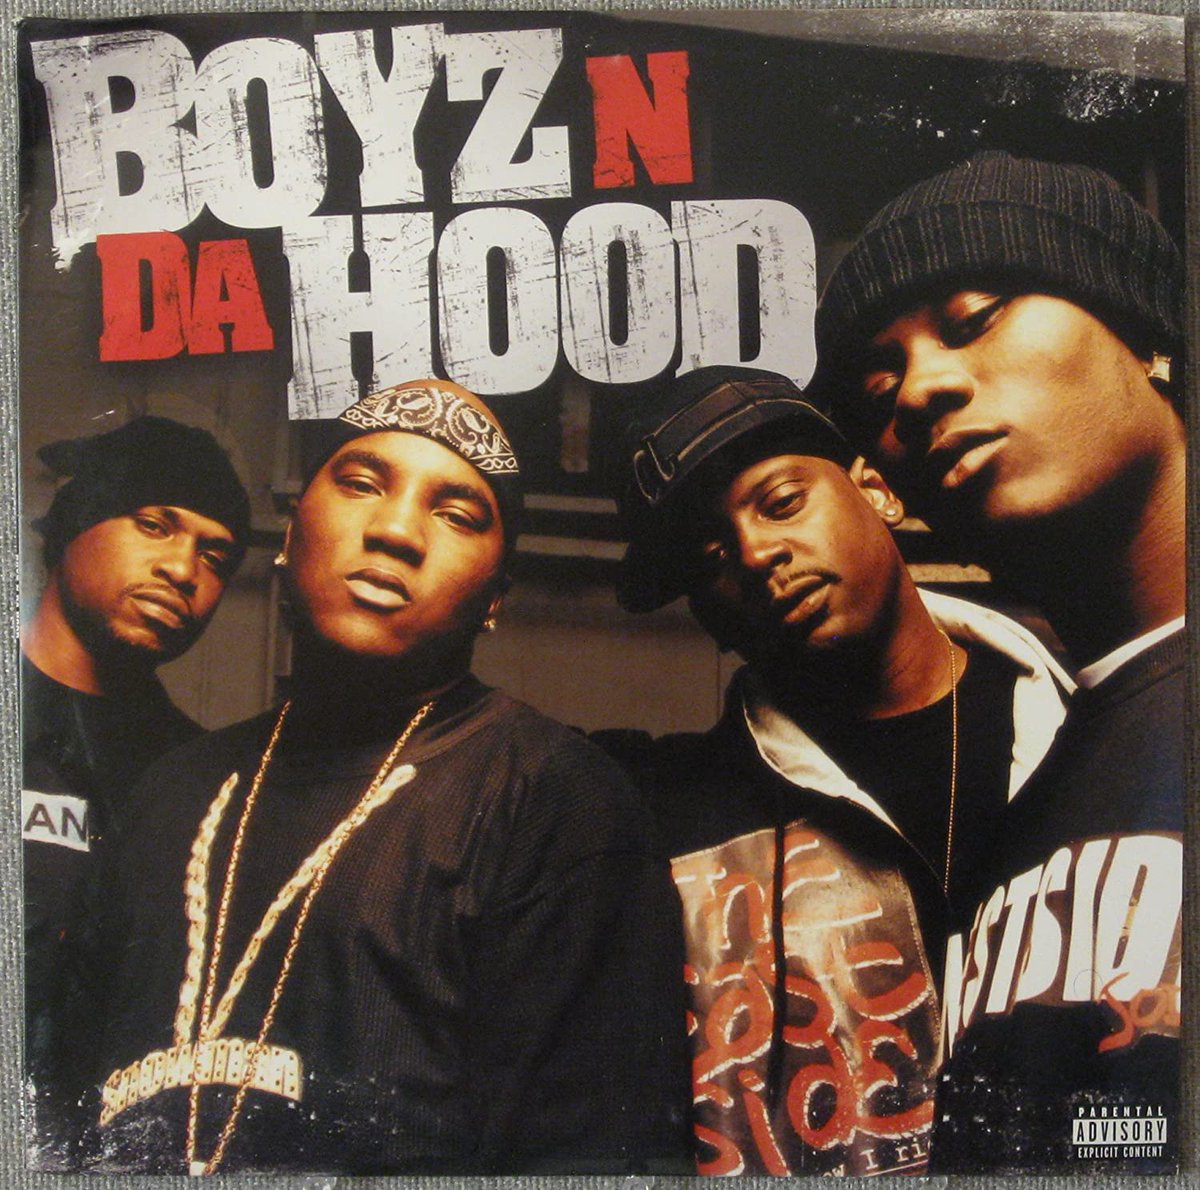 2004-05. The UN (UN Or U Out), The Leak Bros (Water World), Boyz N Da Hood (self titled) and the superb debut from M.I.A. (Arular). All-Star talent: Roc Marciano, Dino Brave, Mike Raw, Laku, Cage, Tame 1, Young Jeezy, Jody Breeze, Big Gee, Big Duke and M.I.A.  #hiphop